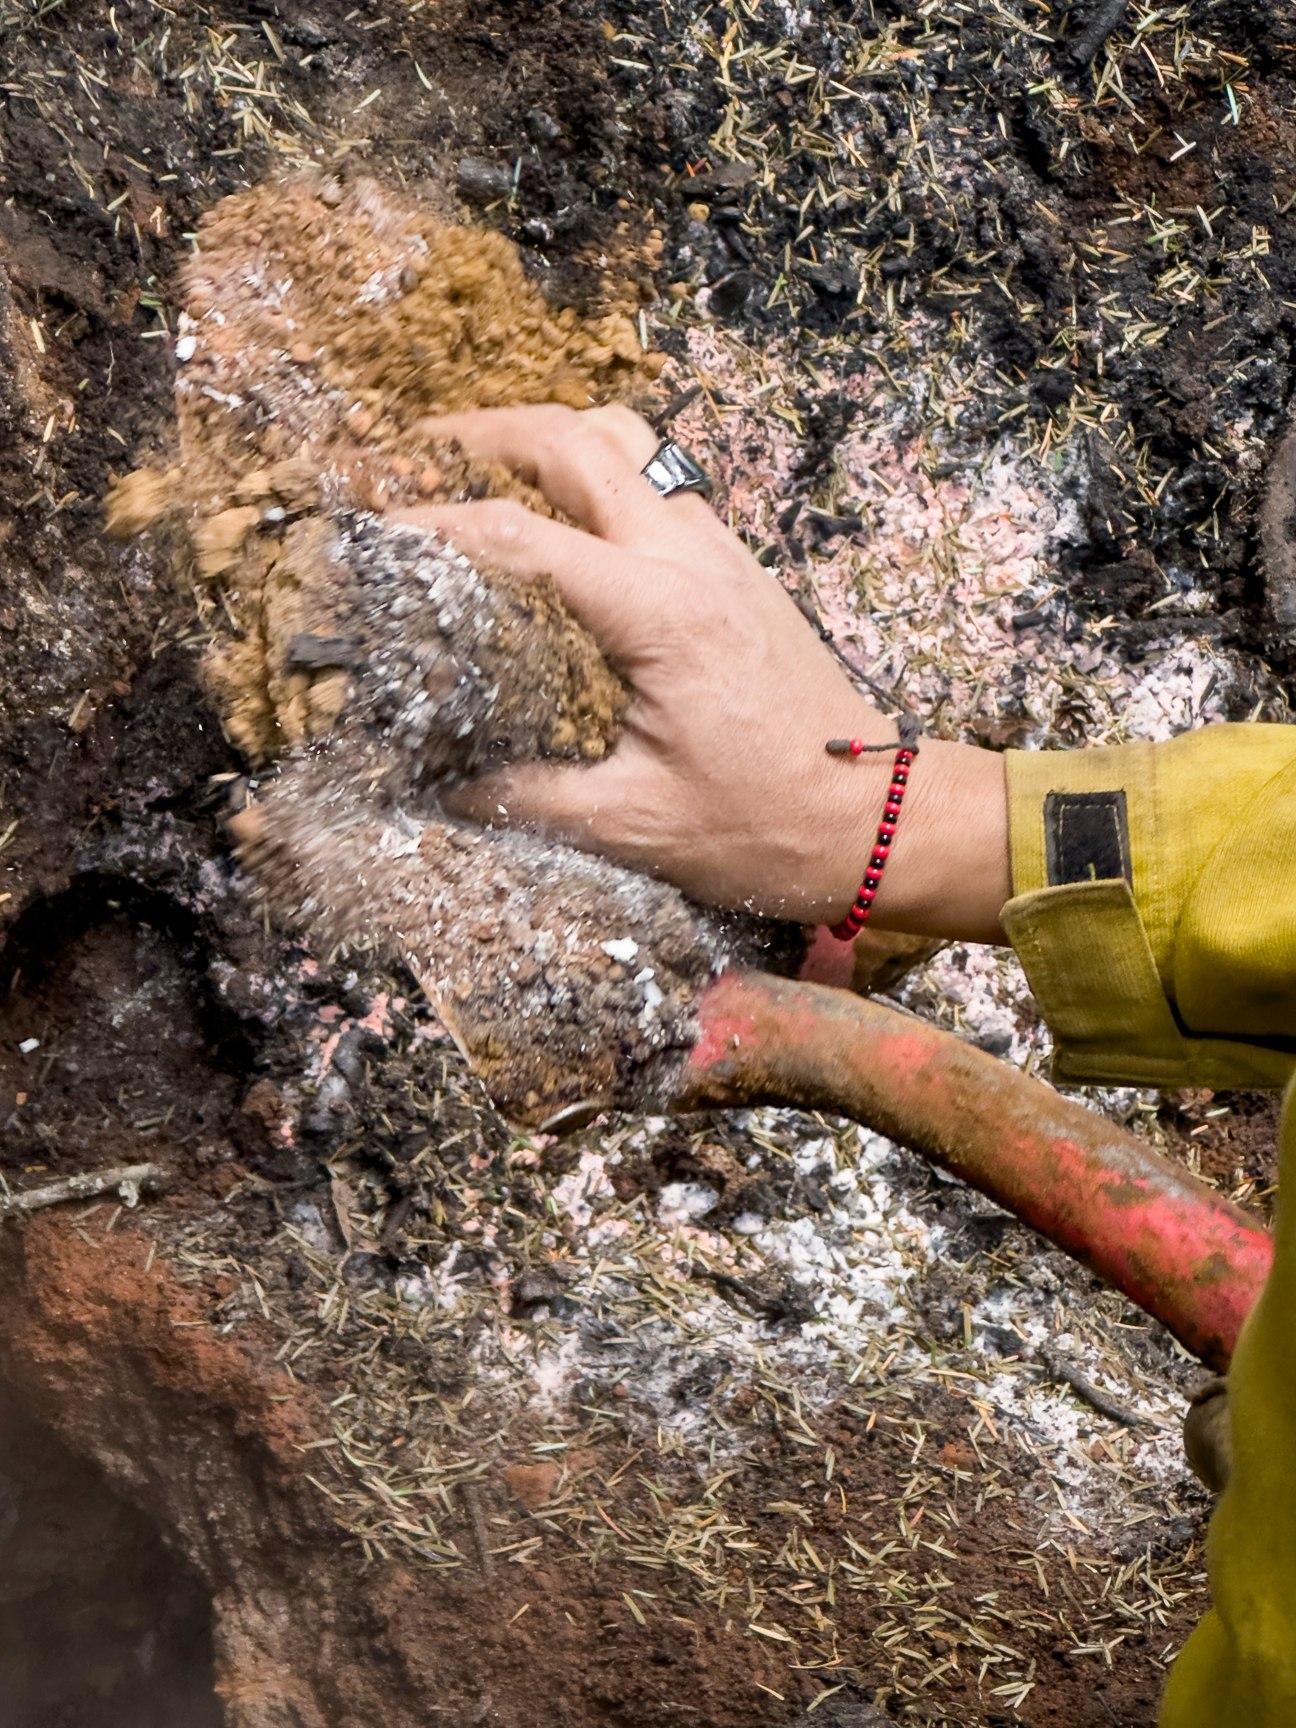 A hand appears in the soil and ash to find whether heat exists